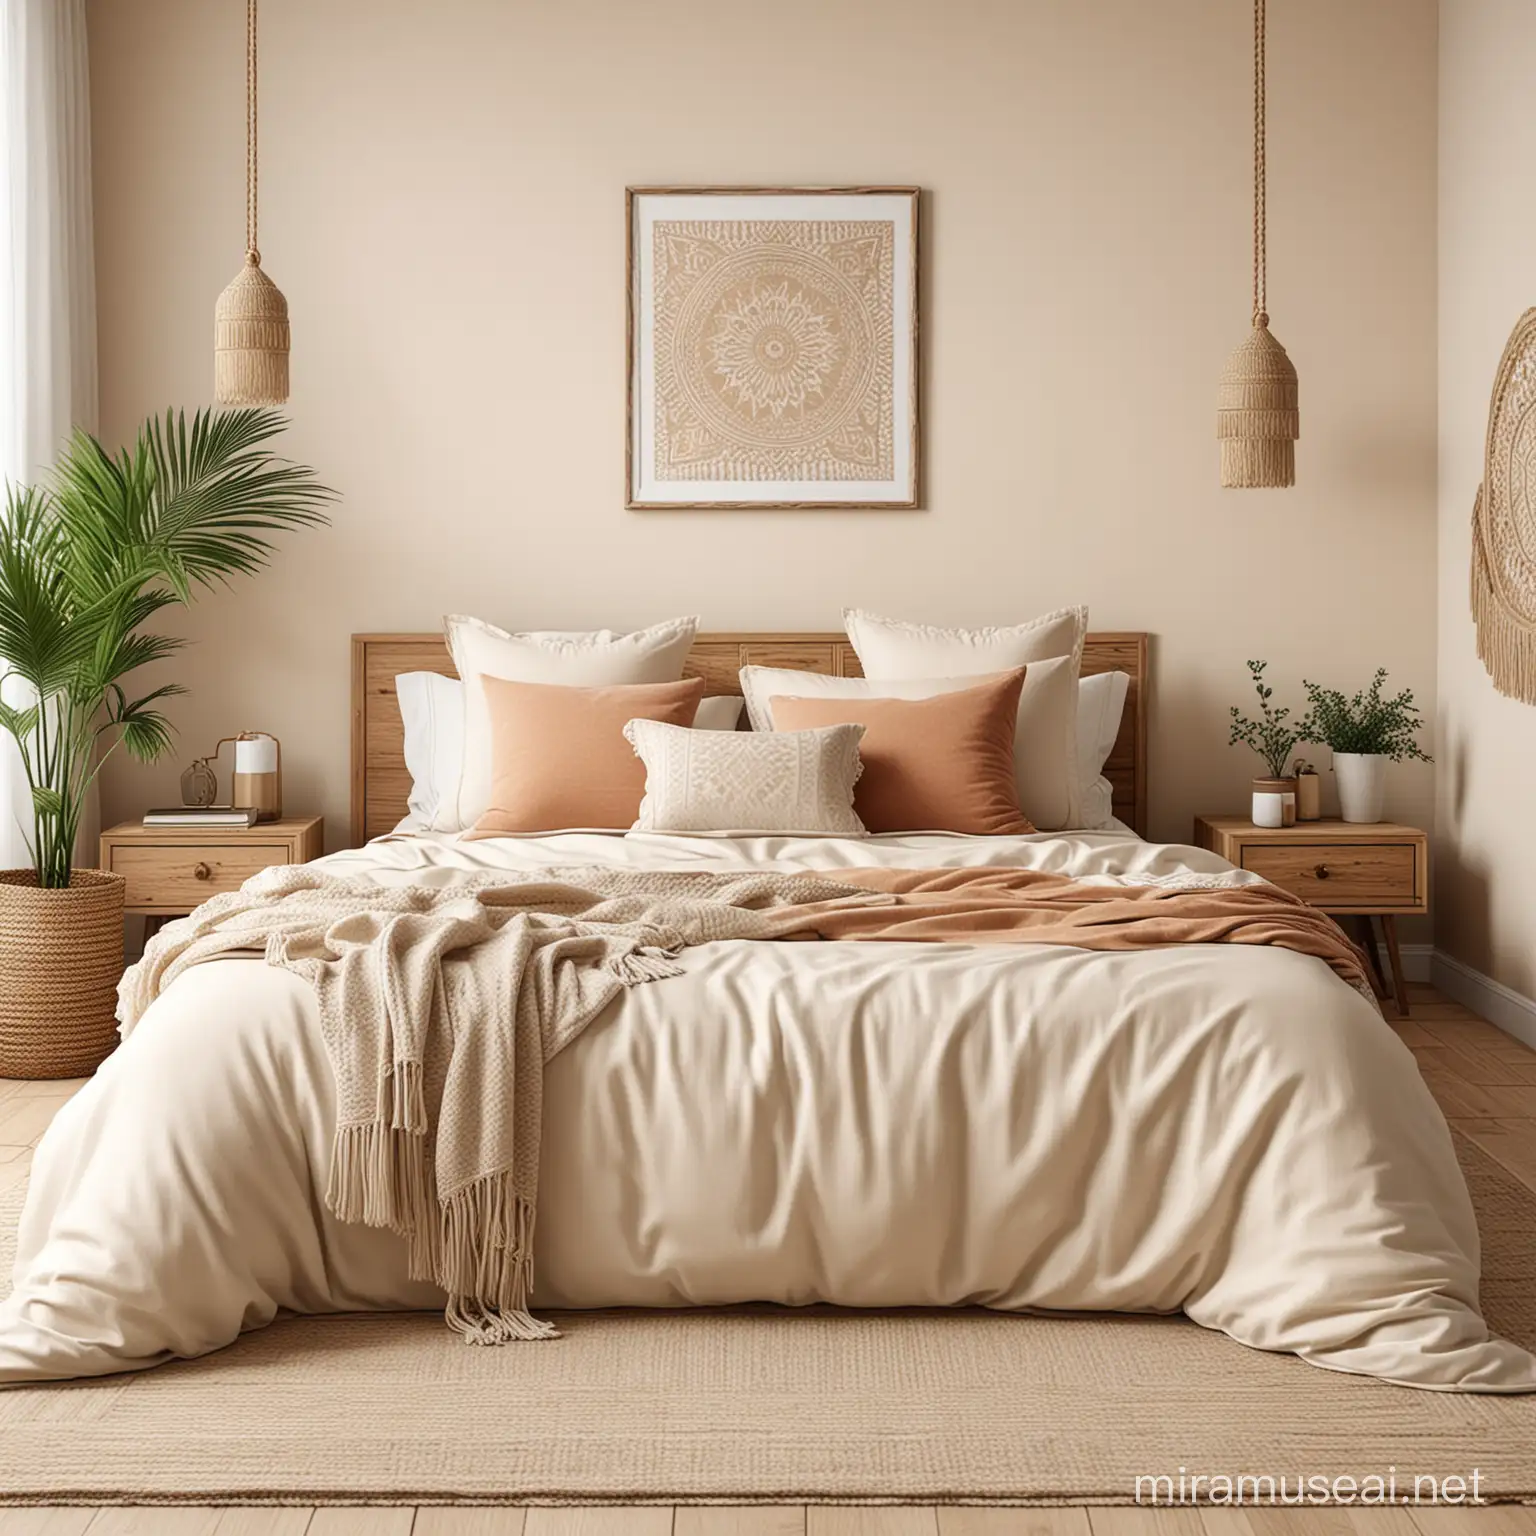 Boho Cream Color Bedroom Mockup with Cozy Textiles and Natural Elements